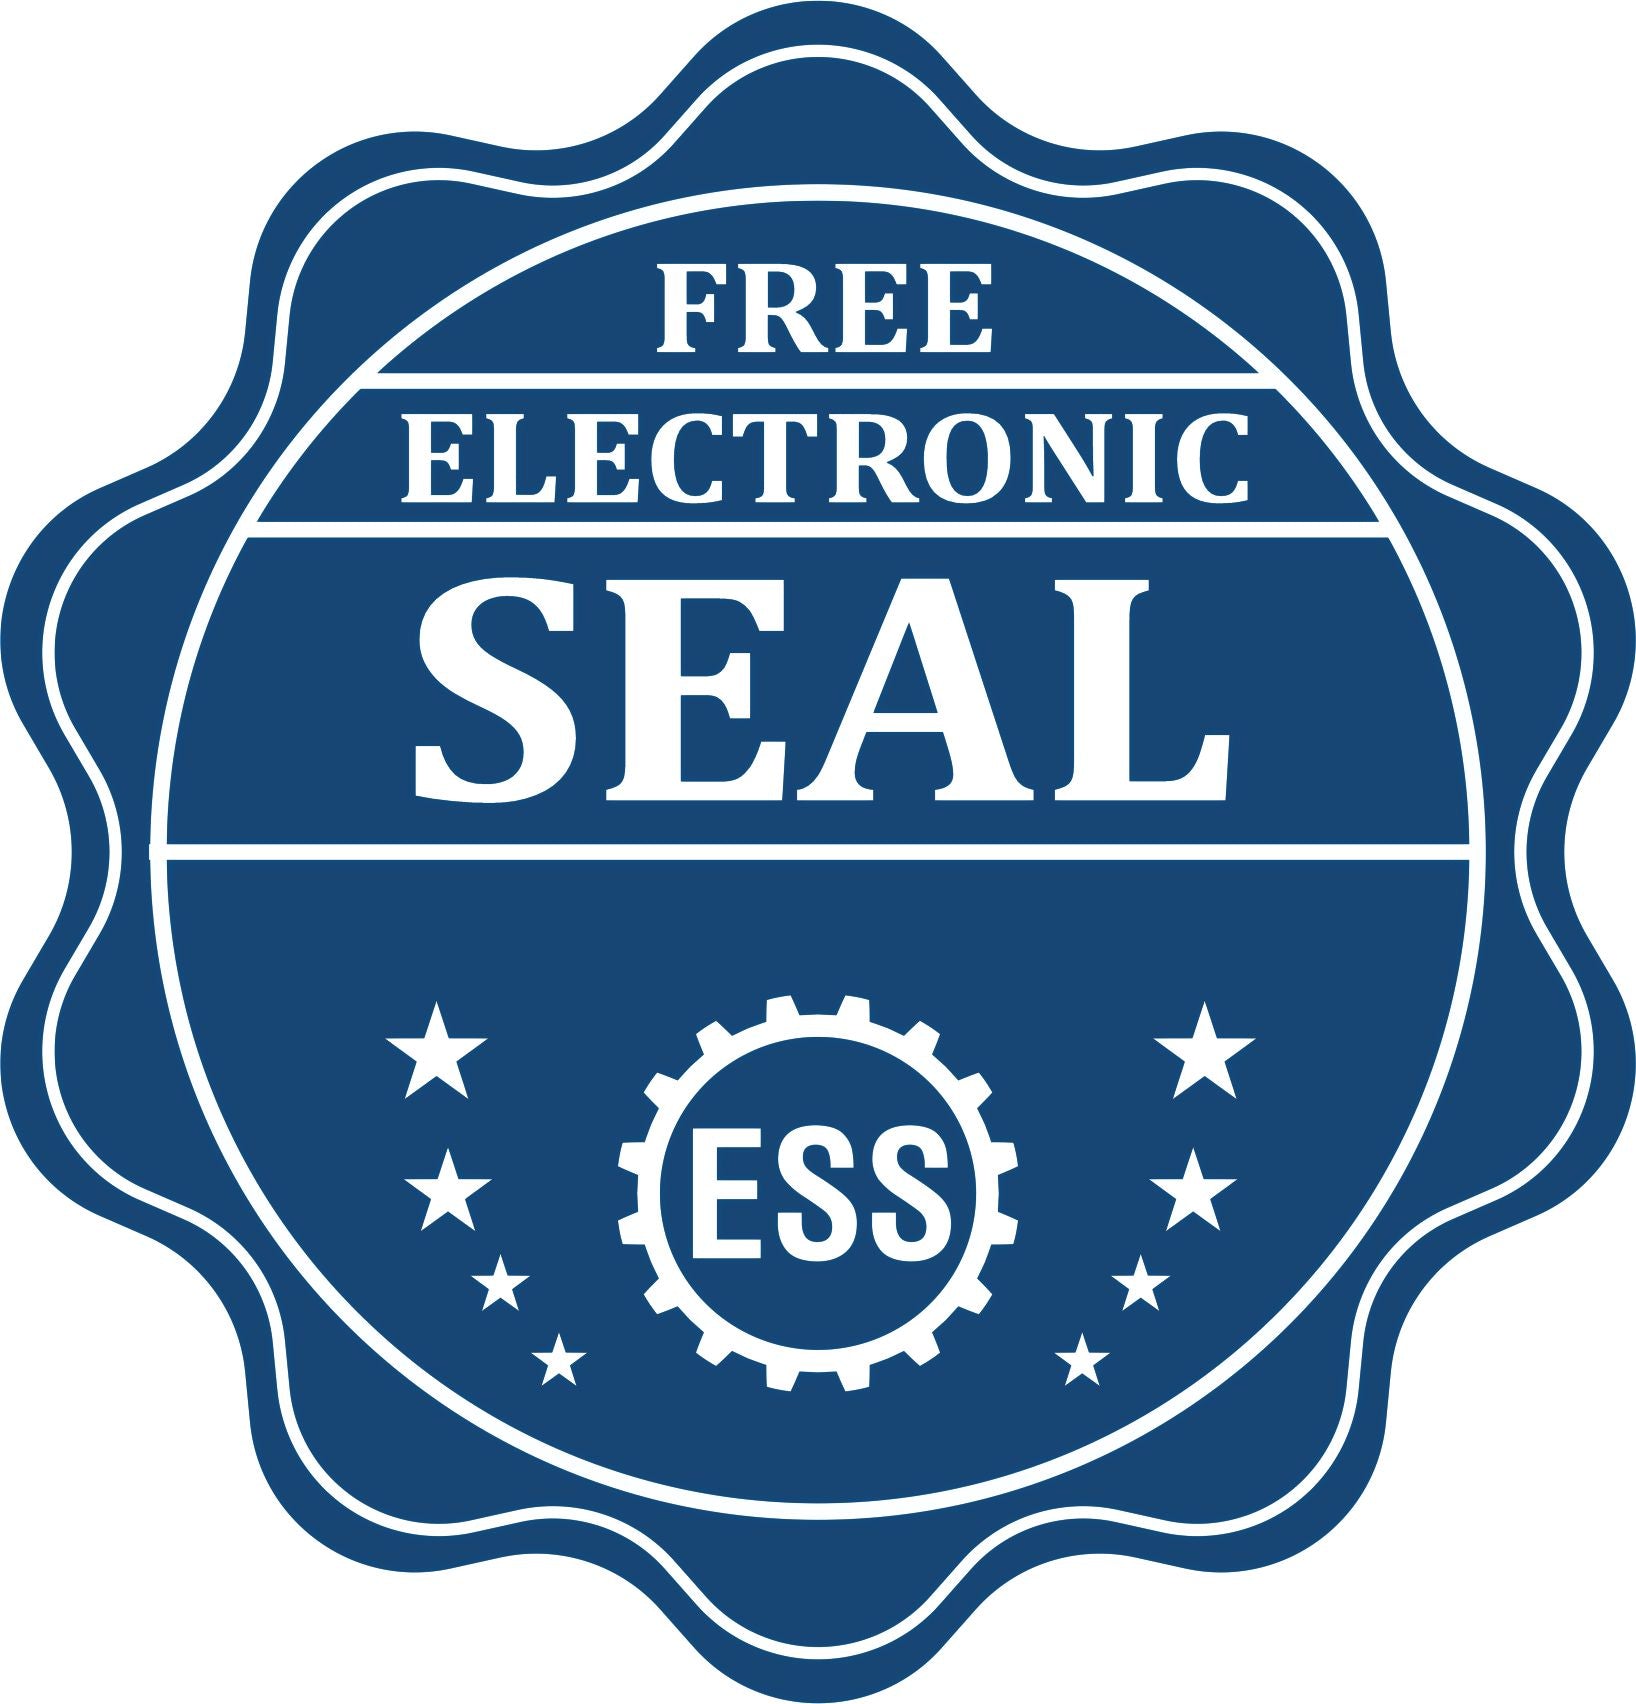 A badge showing a free electronic seal for the Gift Georgia Land Surveyor Seal with stars and the ESS gear on the emblem.